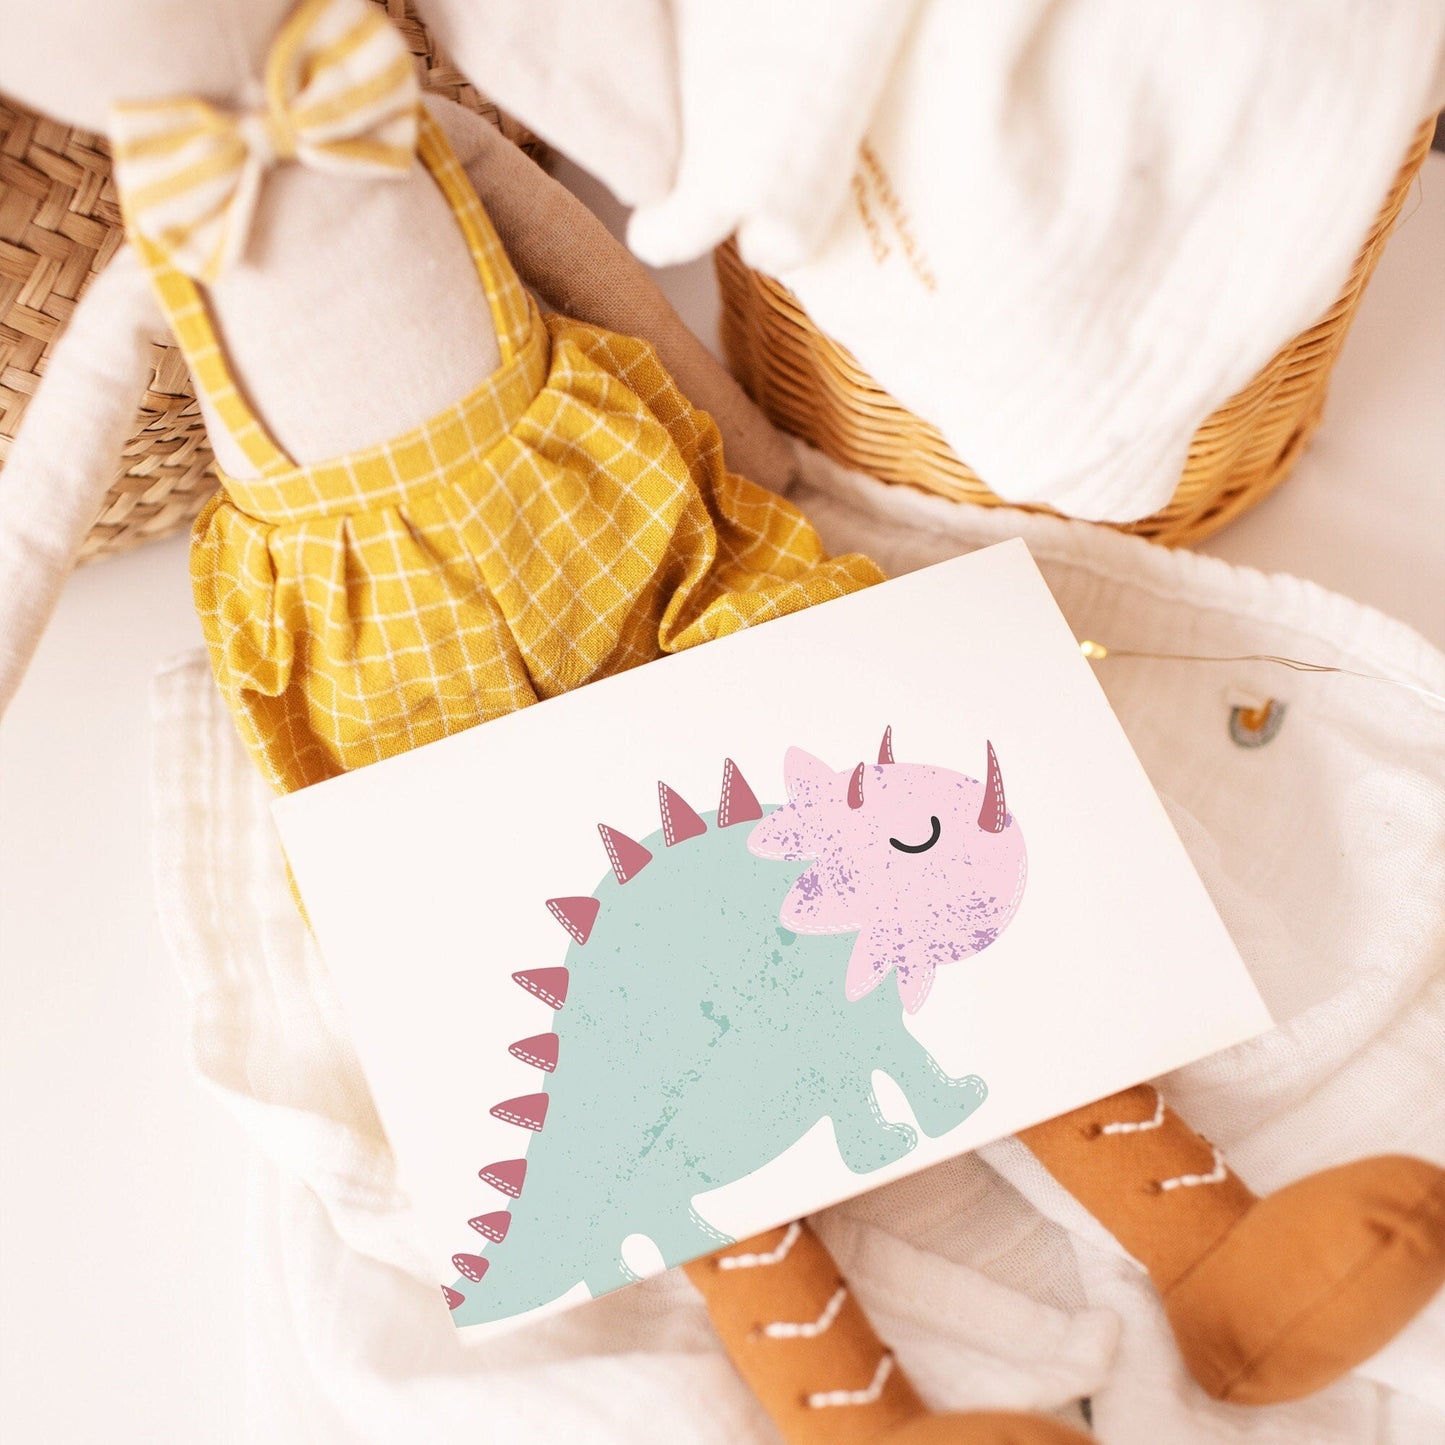 Pink and purple dinosaur Postcard Set - Dolly and Fred Designs